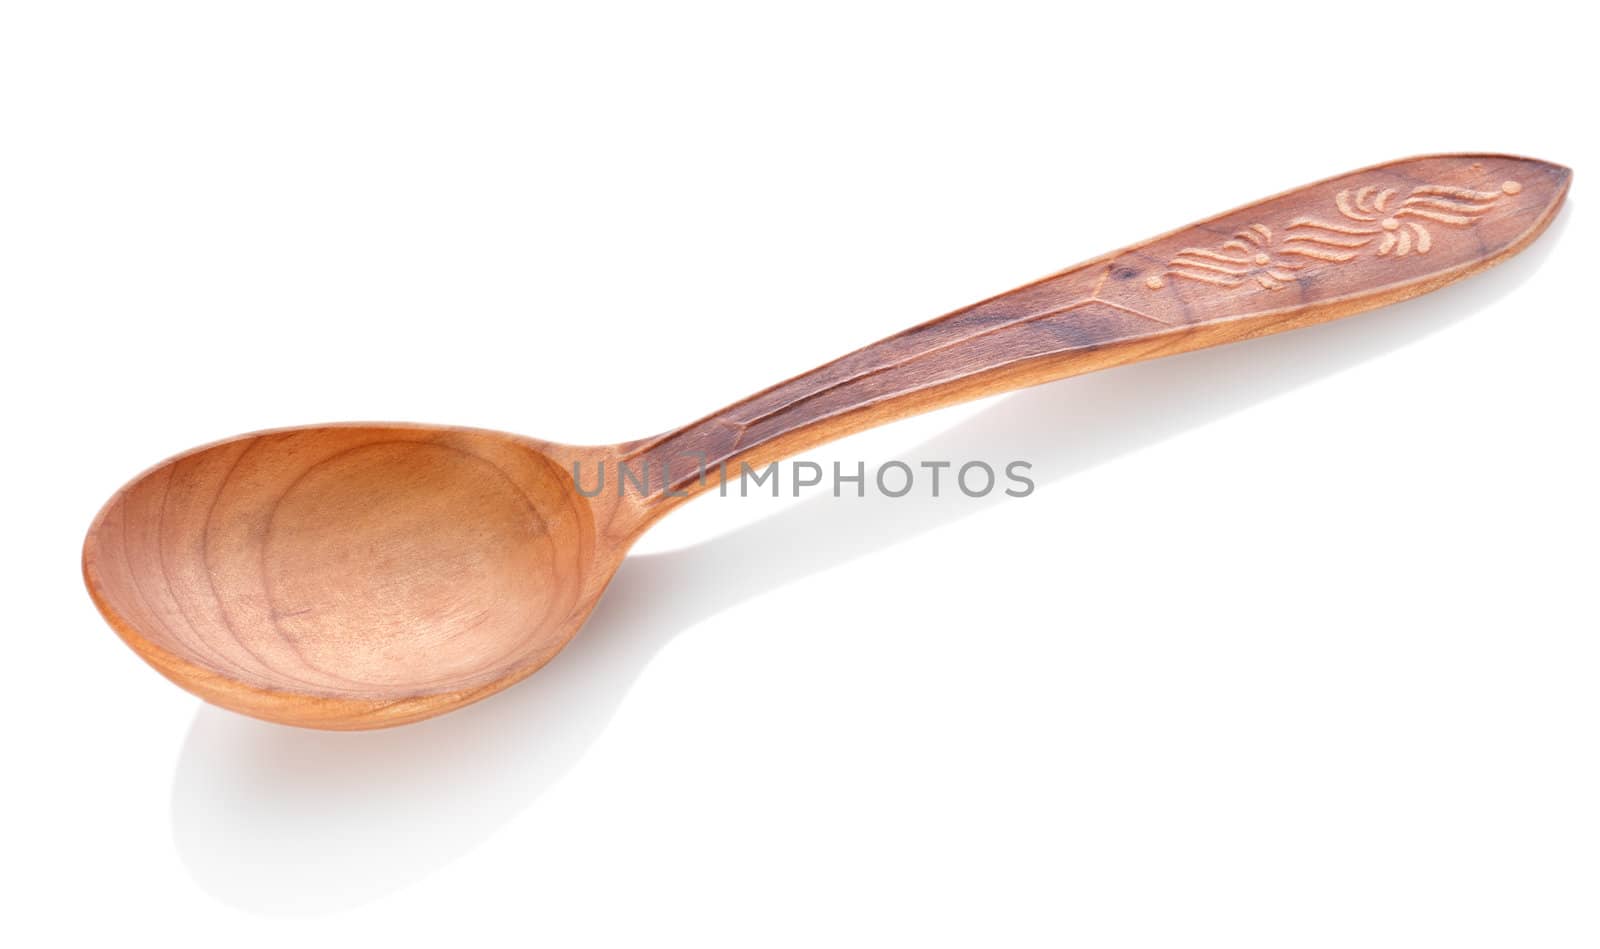 Wooden spoon isolated on a white background